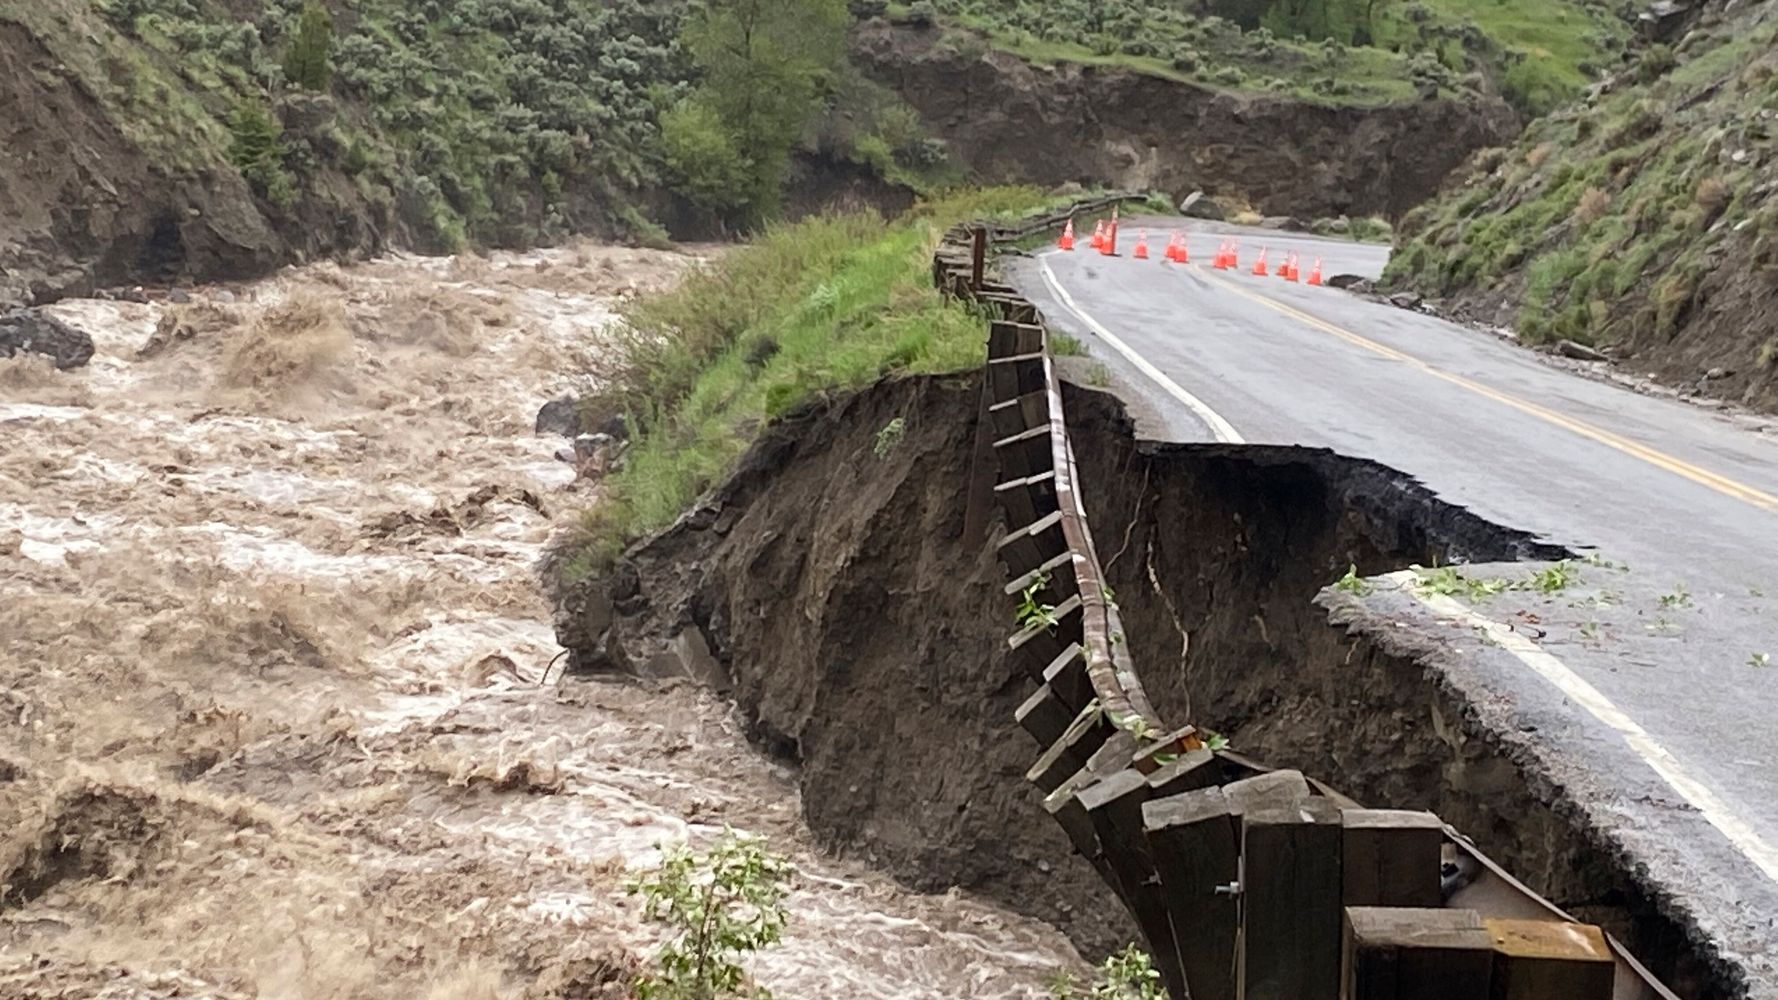 Photos Show The Aftermath Of Yellowstone's Historic Flooding